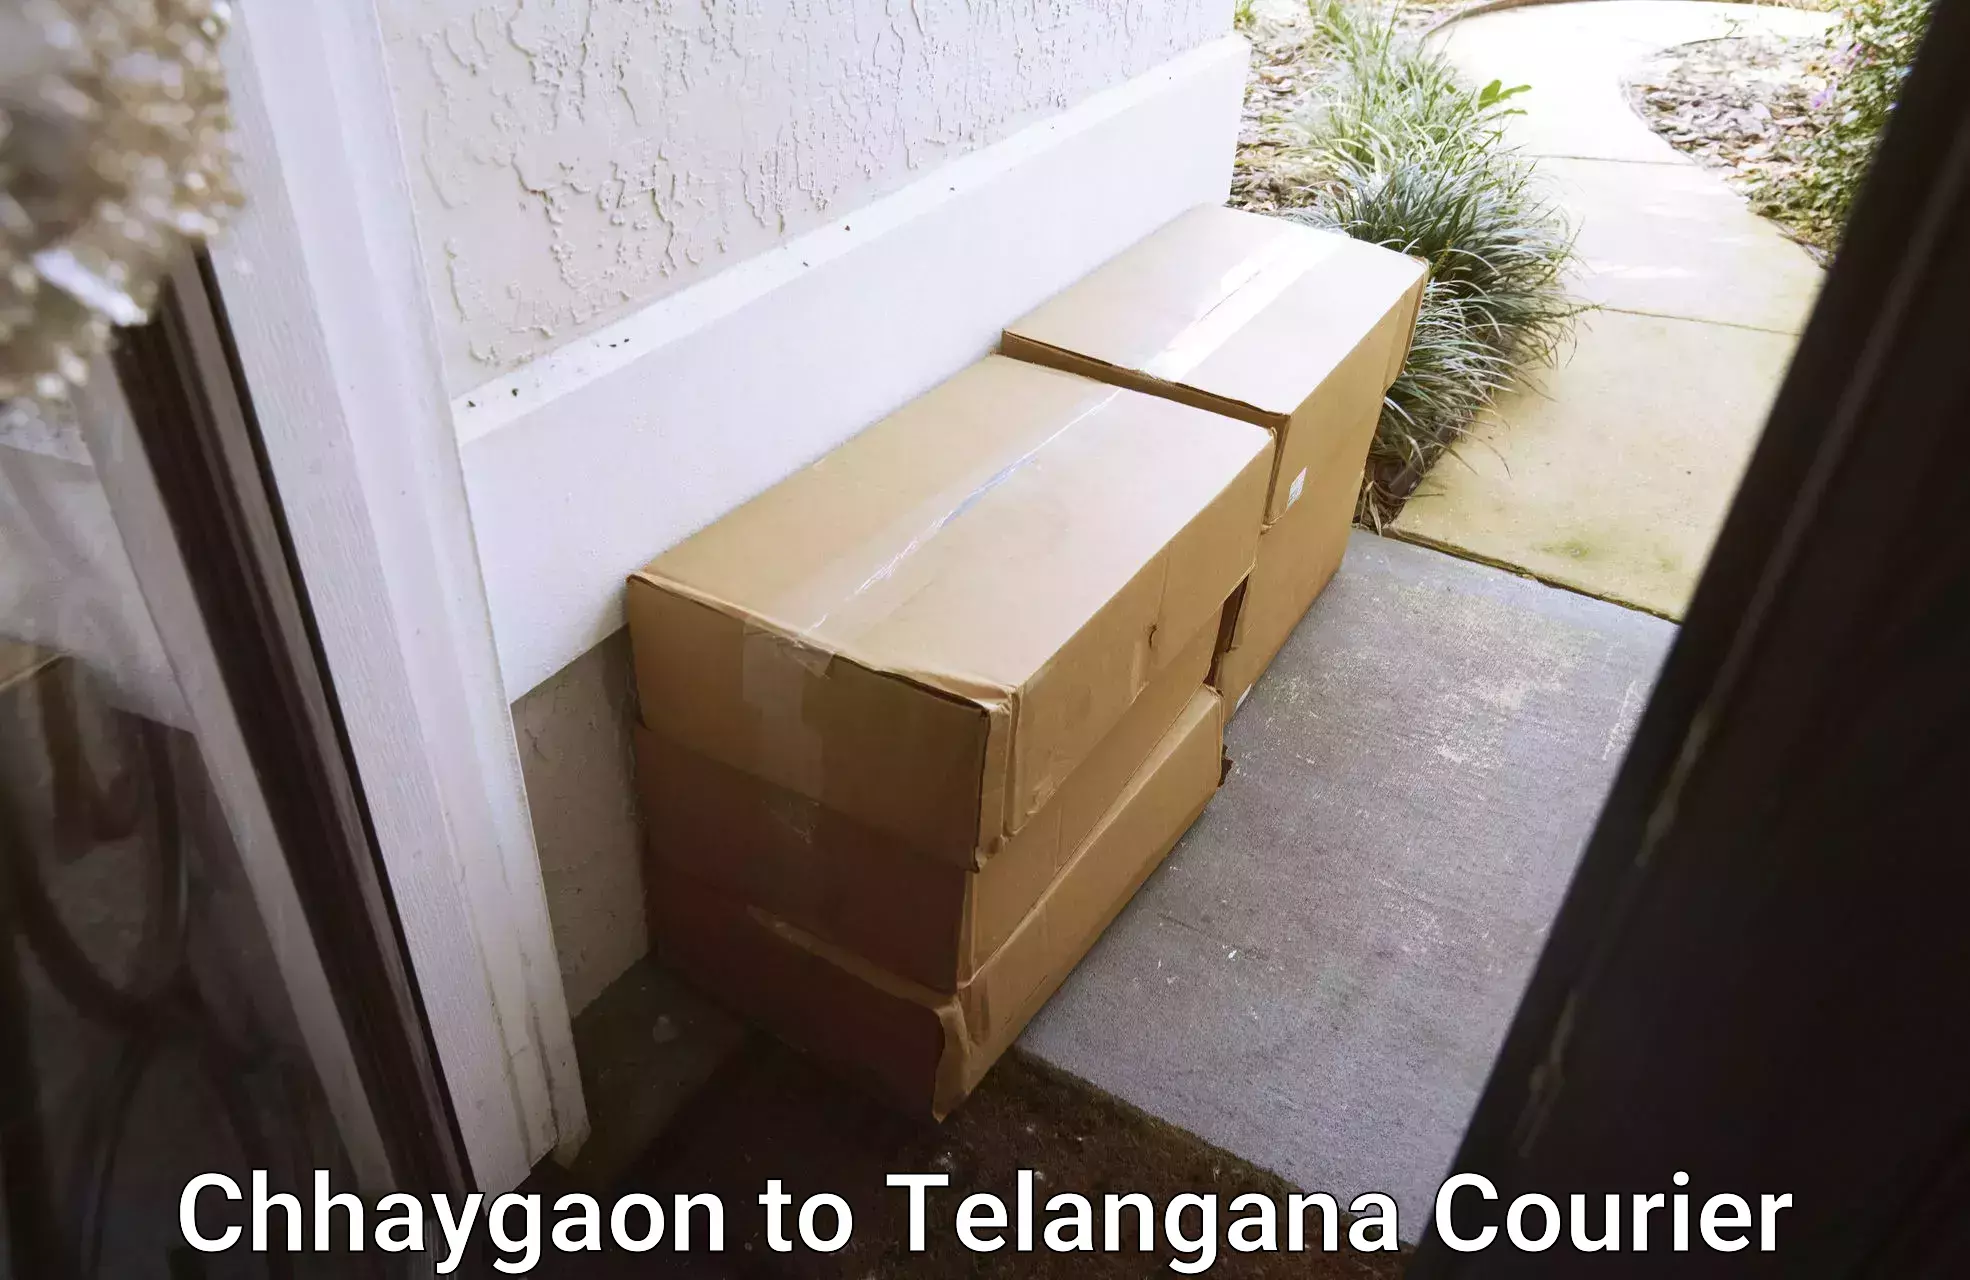 Full-service courier options Chhaygaon to Bellampalli